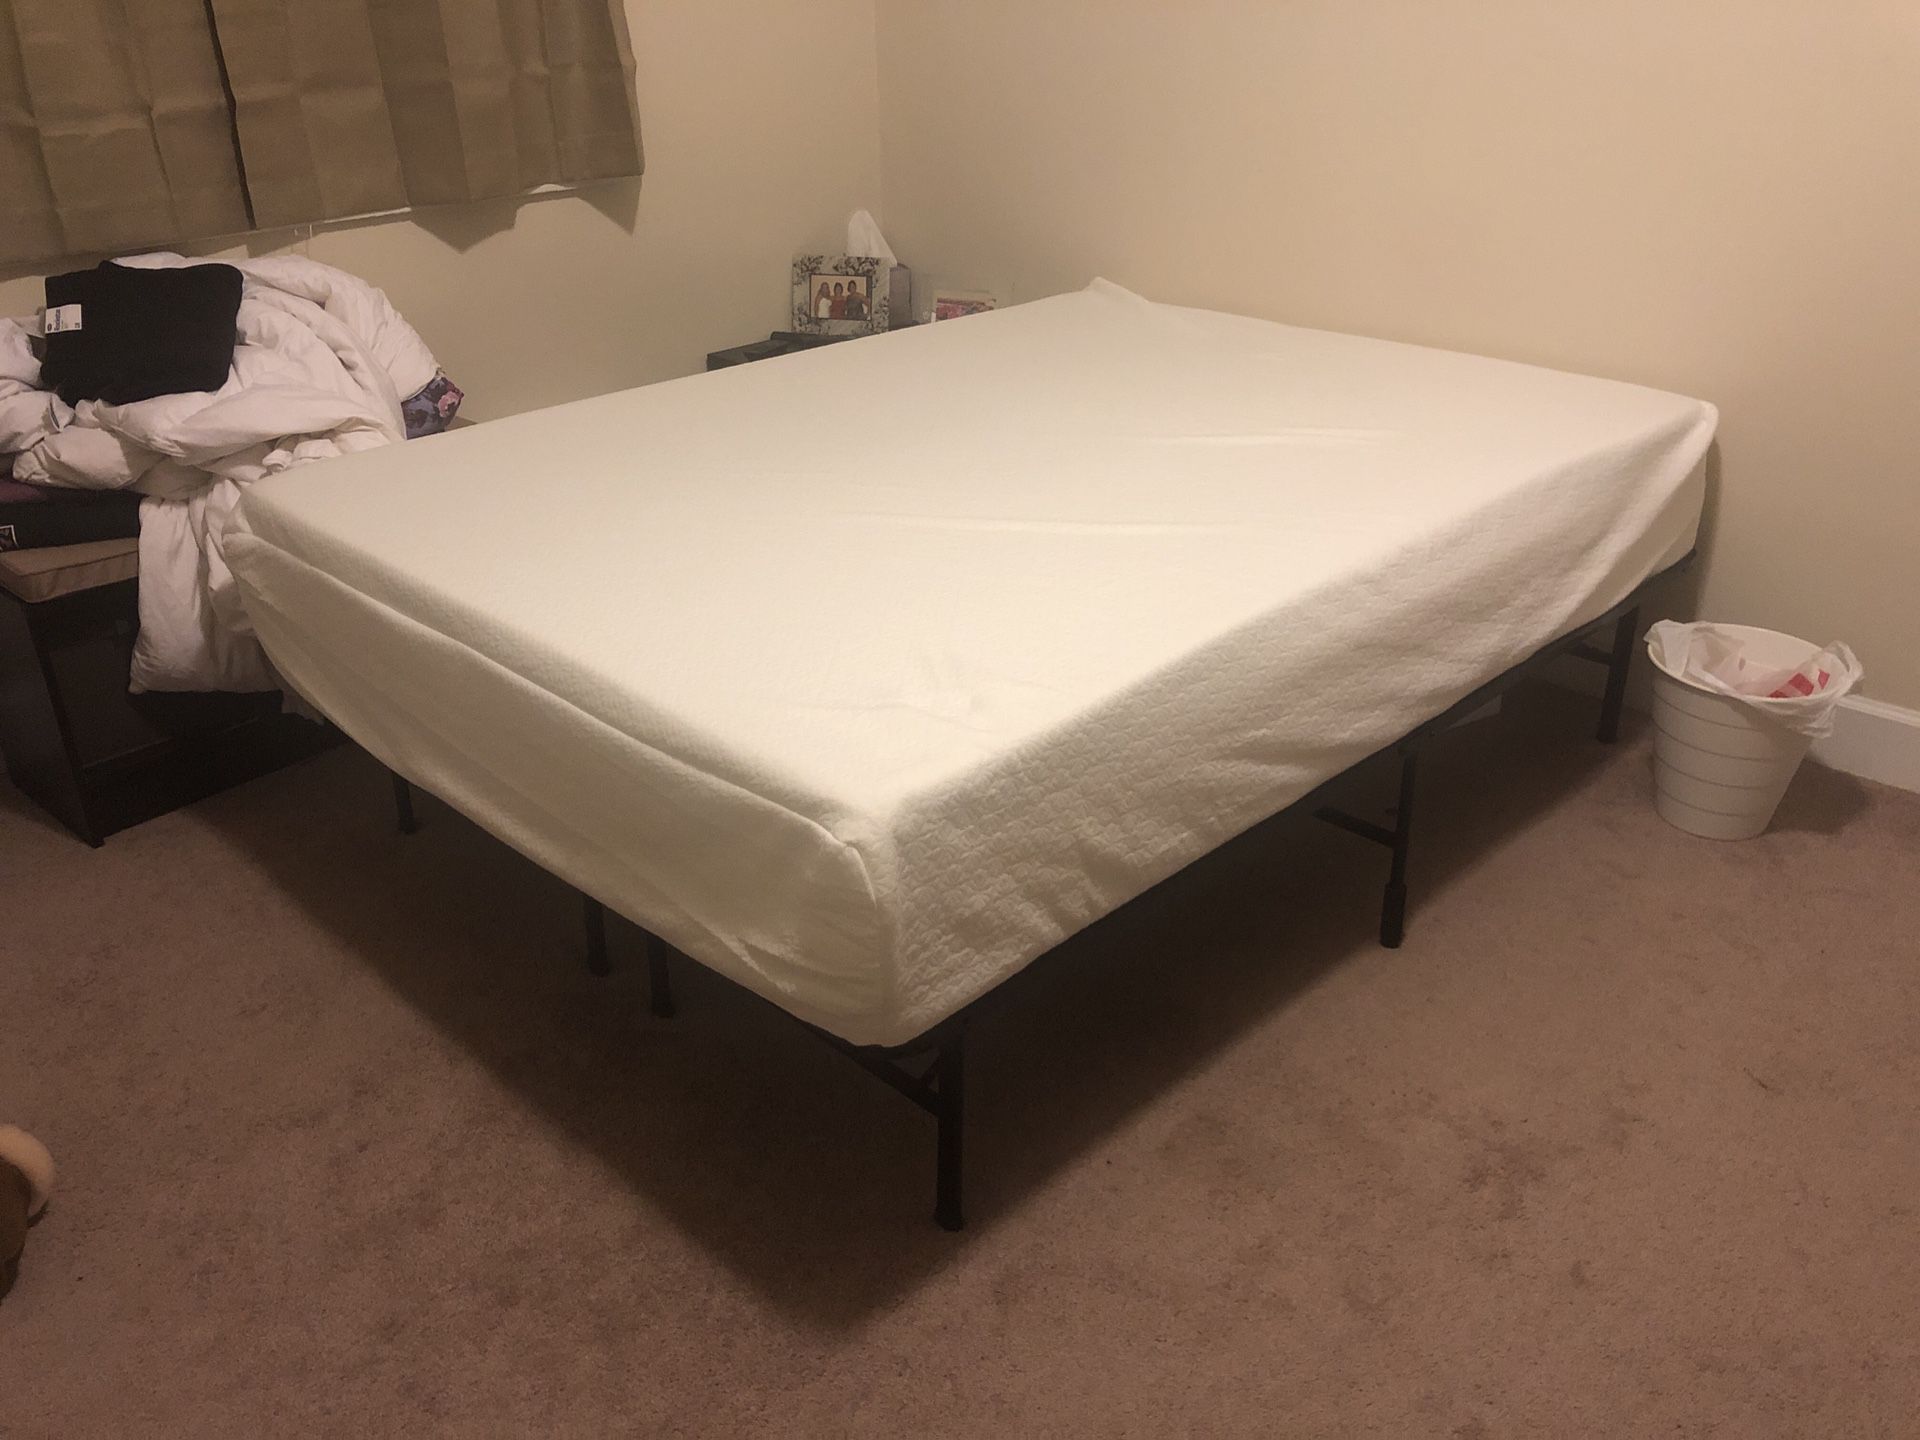 Full size memory foam mattress and bed frame